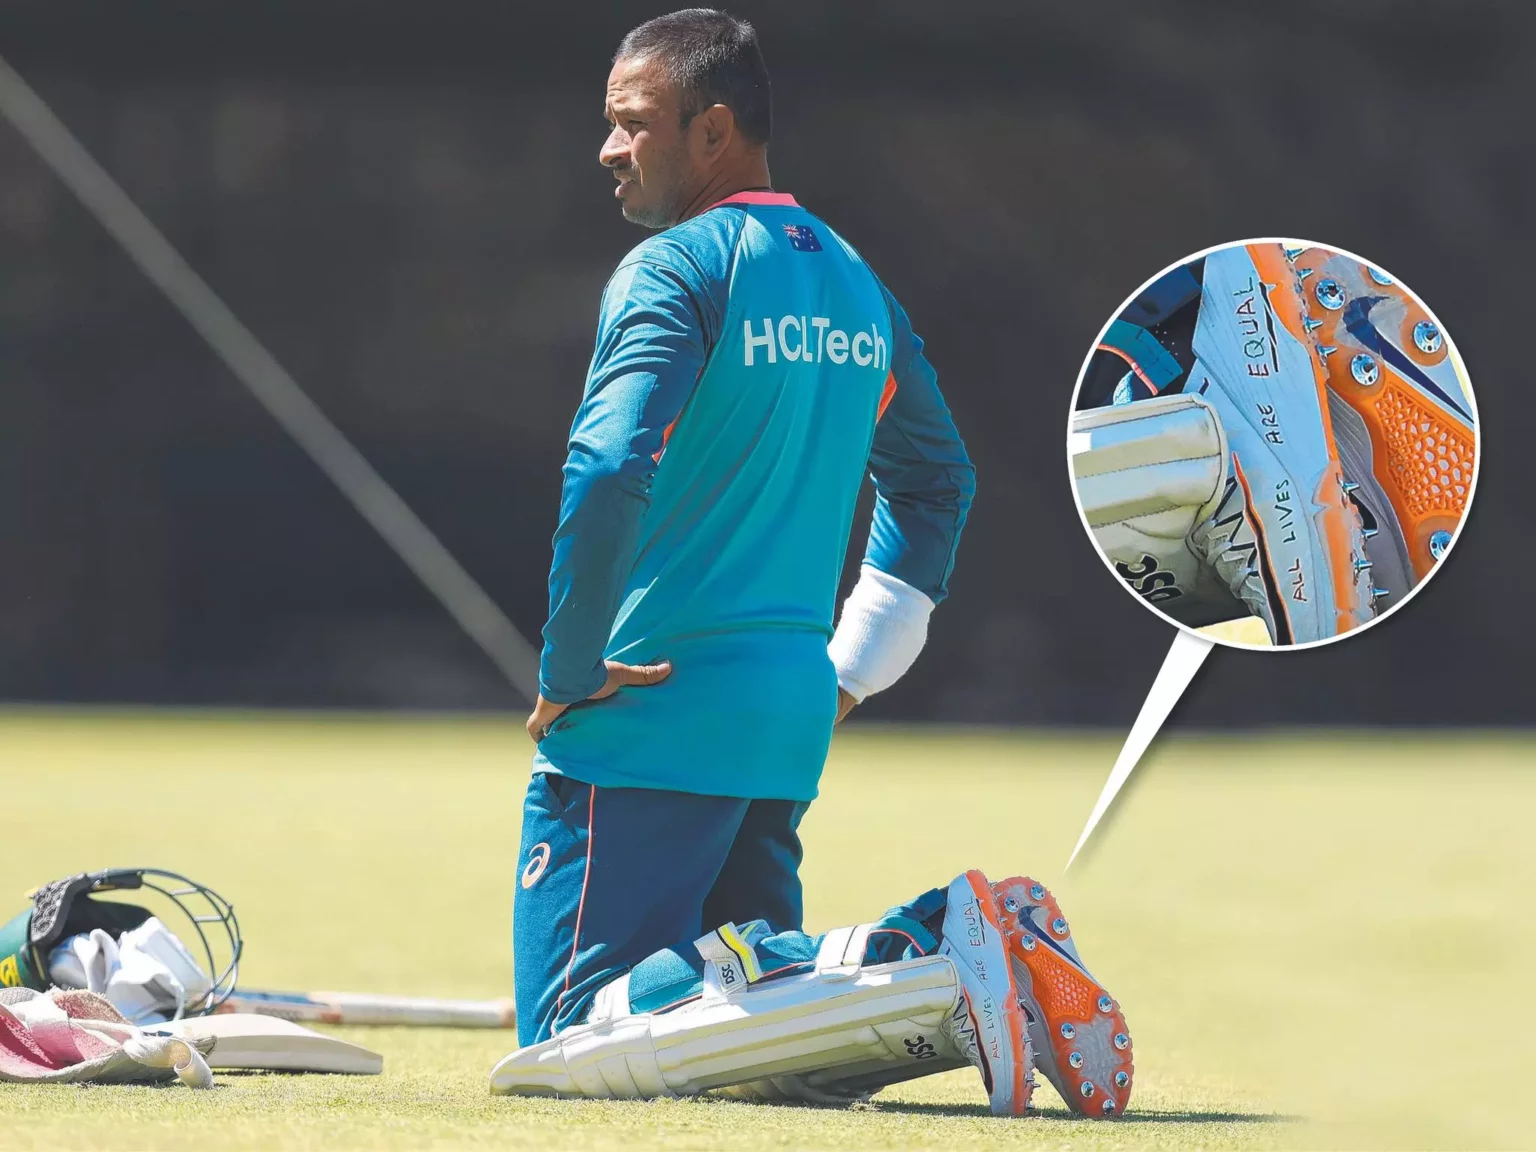 khawaja-to-wear-shoes-with-slogans-showing-solidarity-with-palestinians-during-the-perth-test